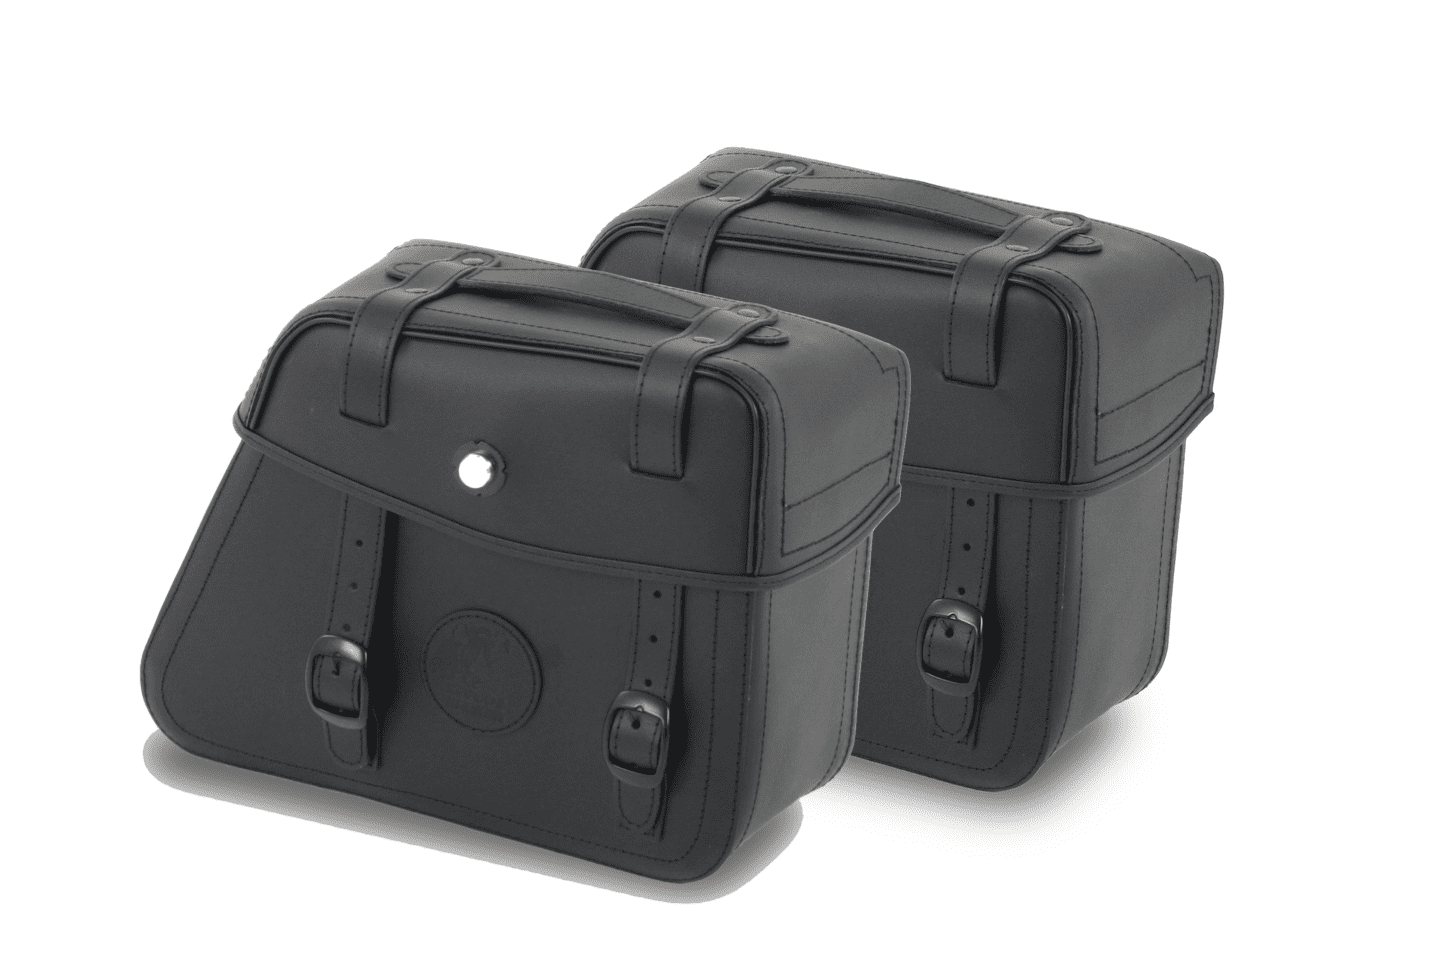 Rugged leather bag set Cutout incl. quick release fastening - black